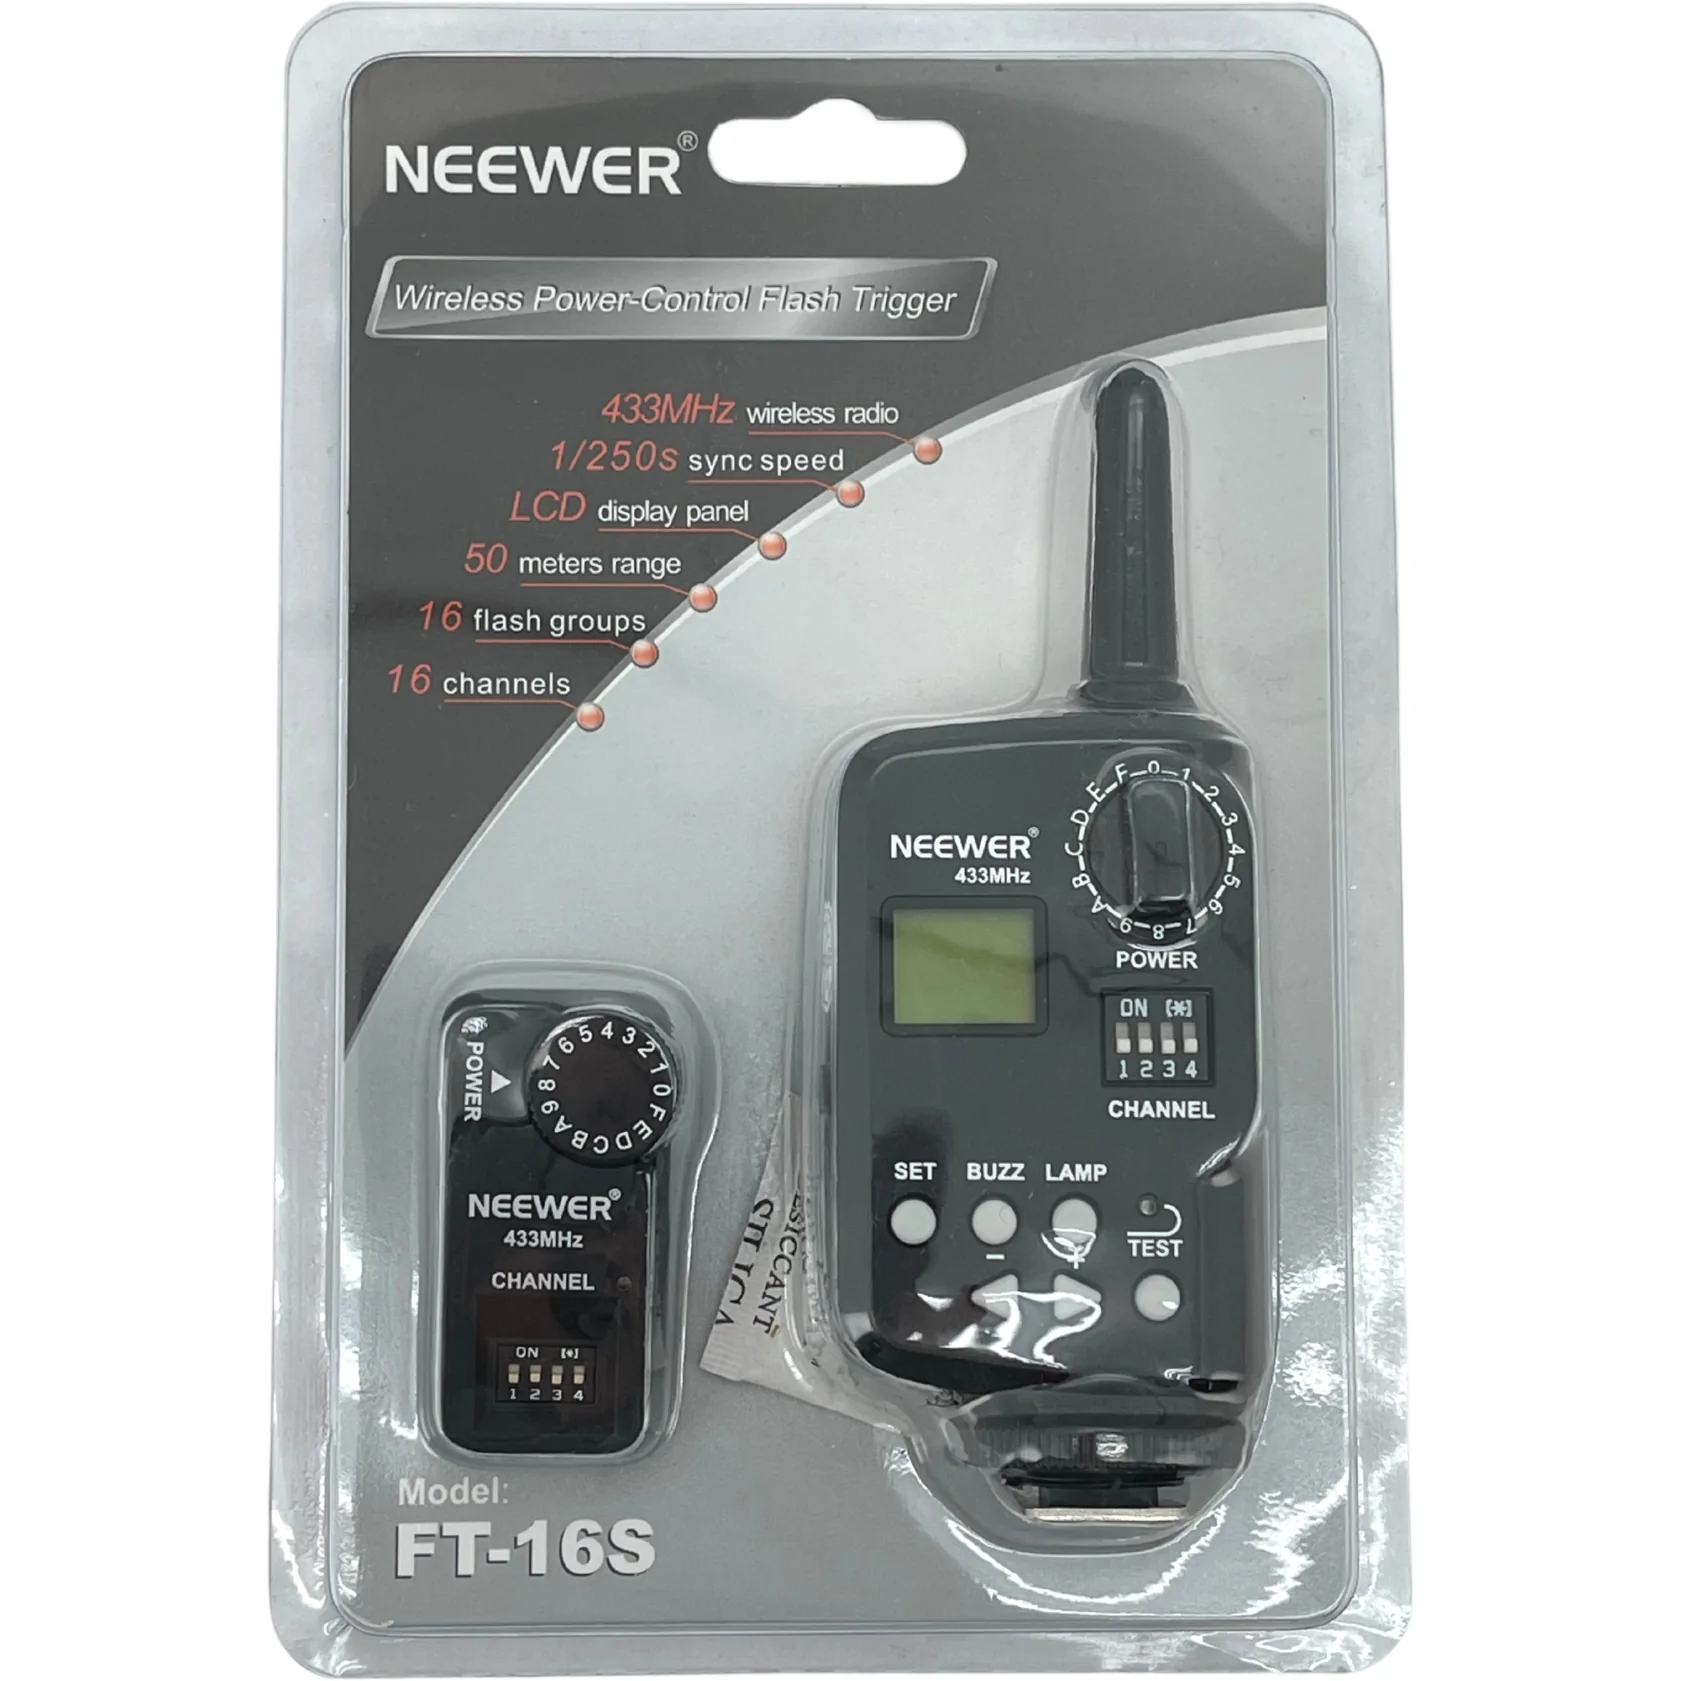 Neewer Wireless Power-Control Flash Trigger / FT-16S / Camera Accessory